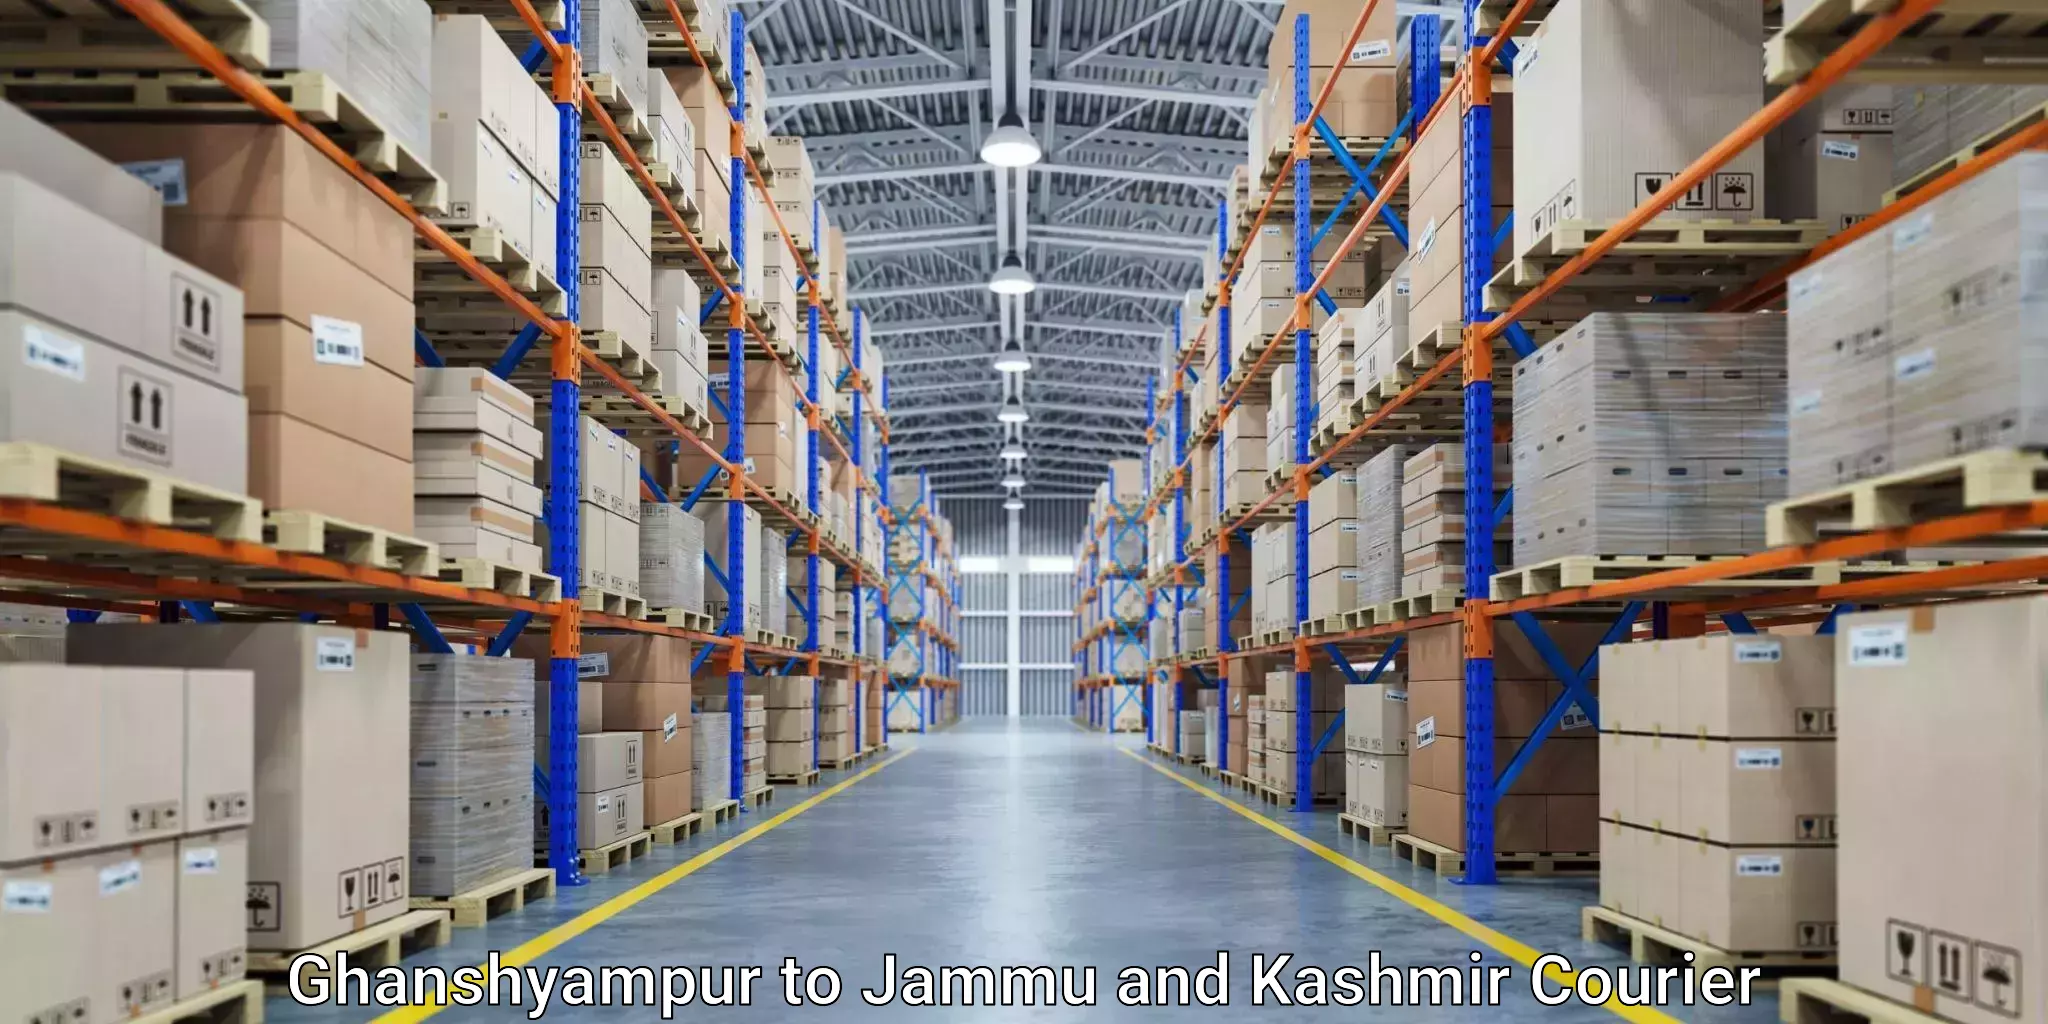 Delivery service partnership Ghanshyampur to Jammu and Kashmir